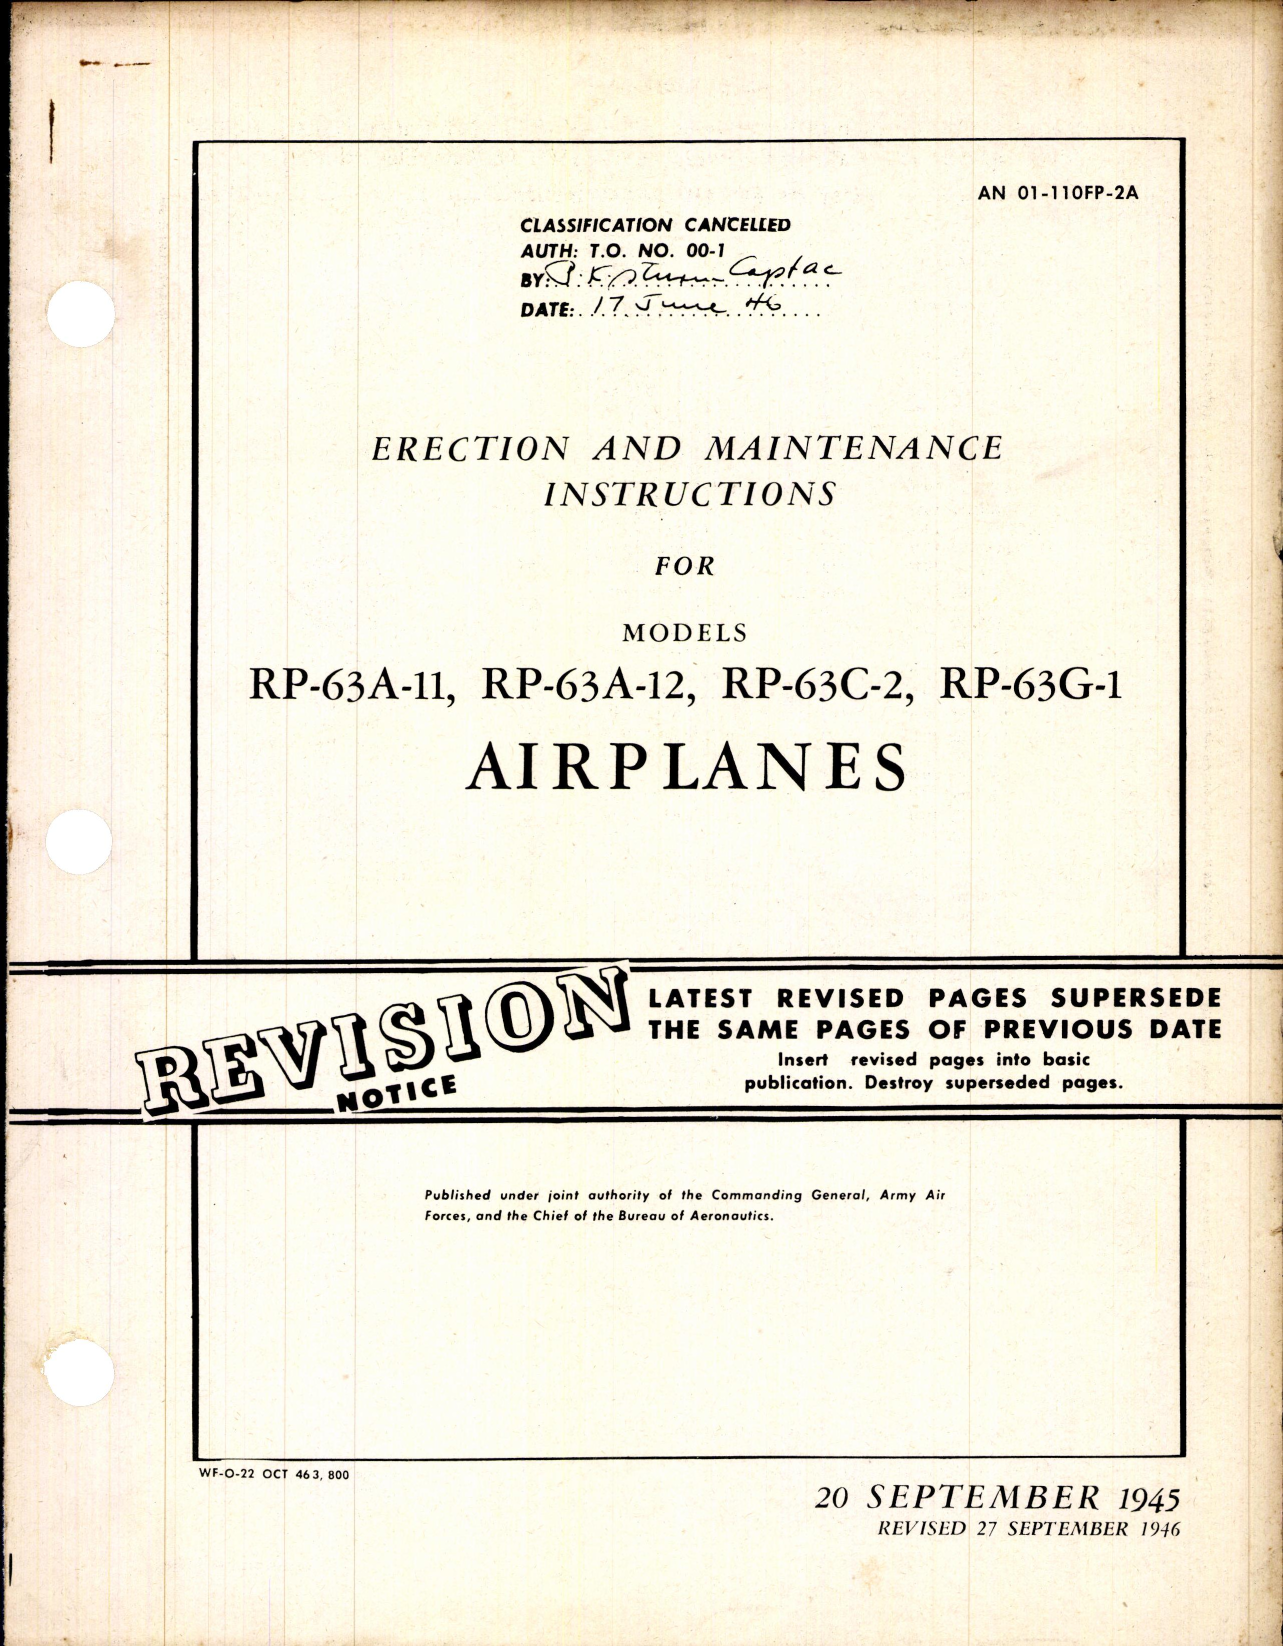 Sample page 1 from AirCorps Library document: Erection and Maintenance Instructions for RP-63A